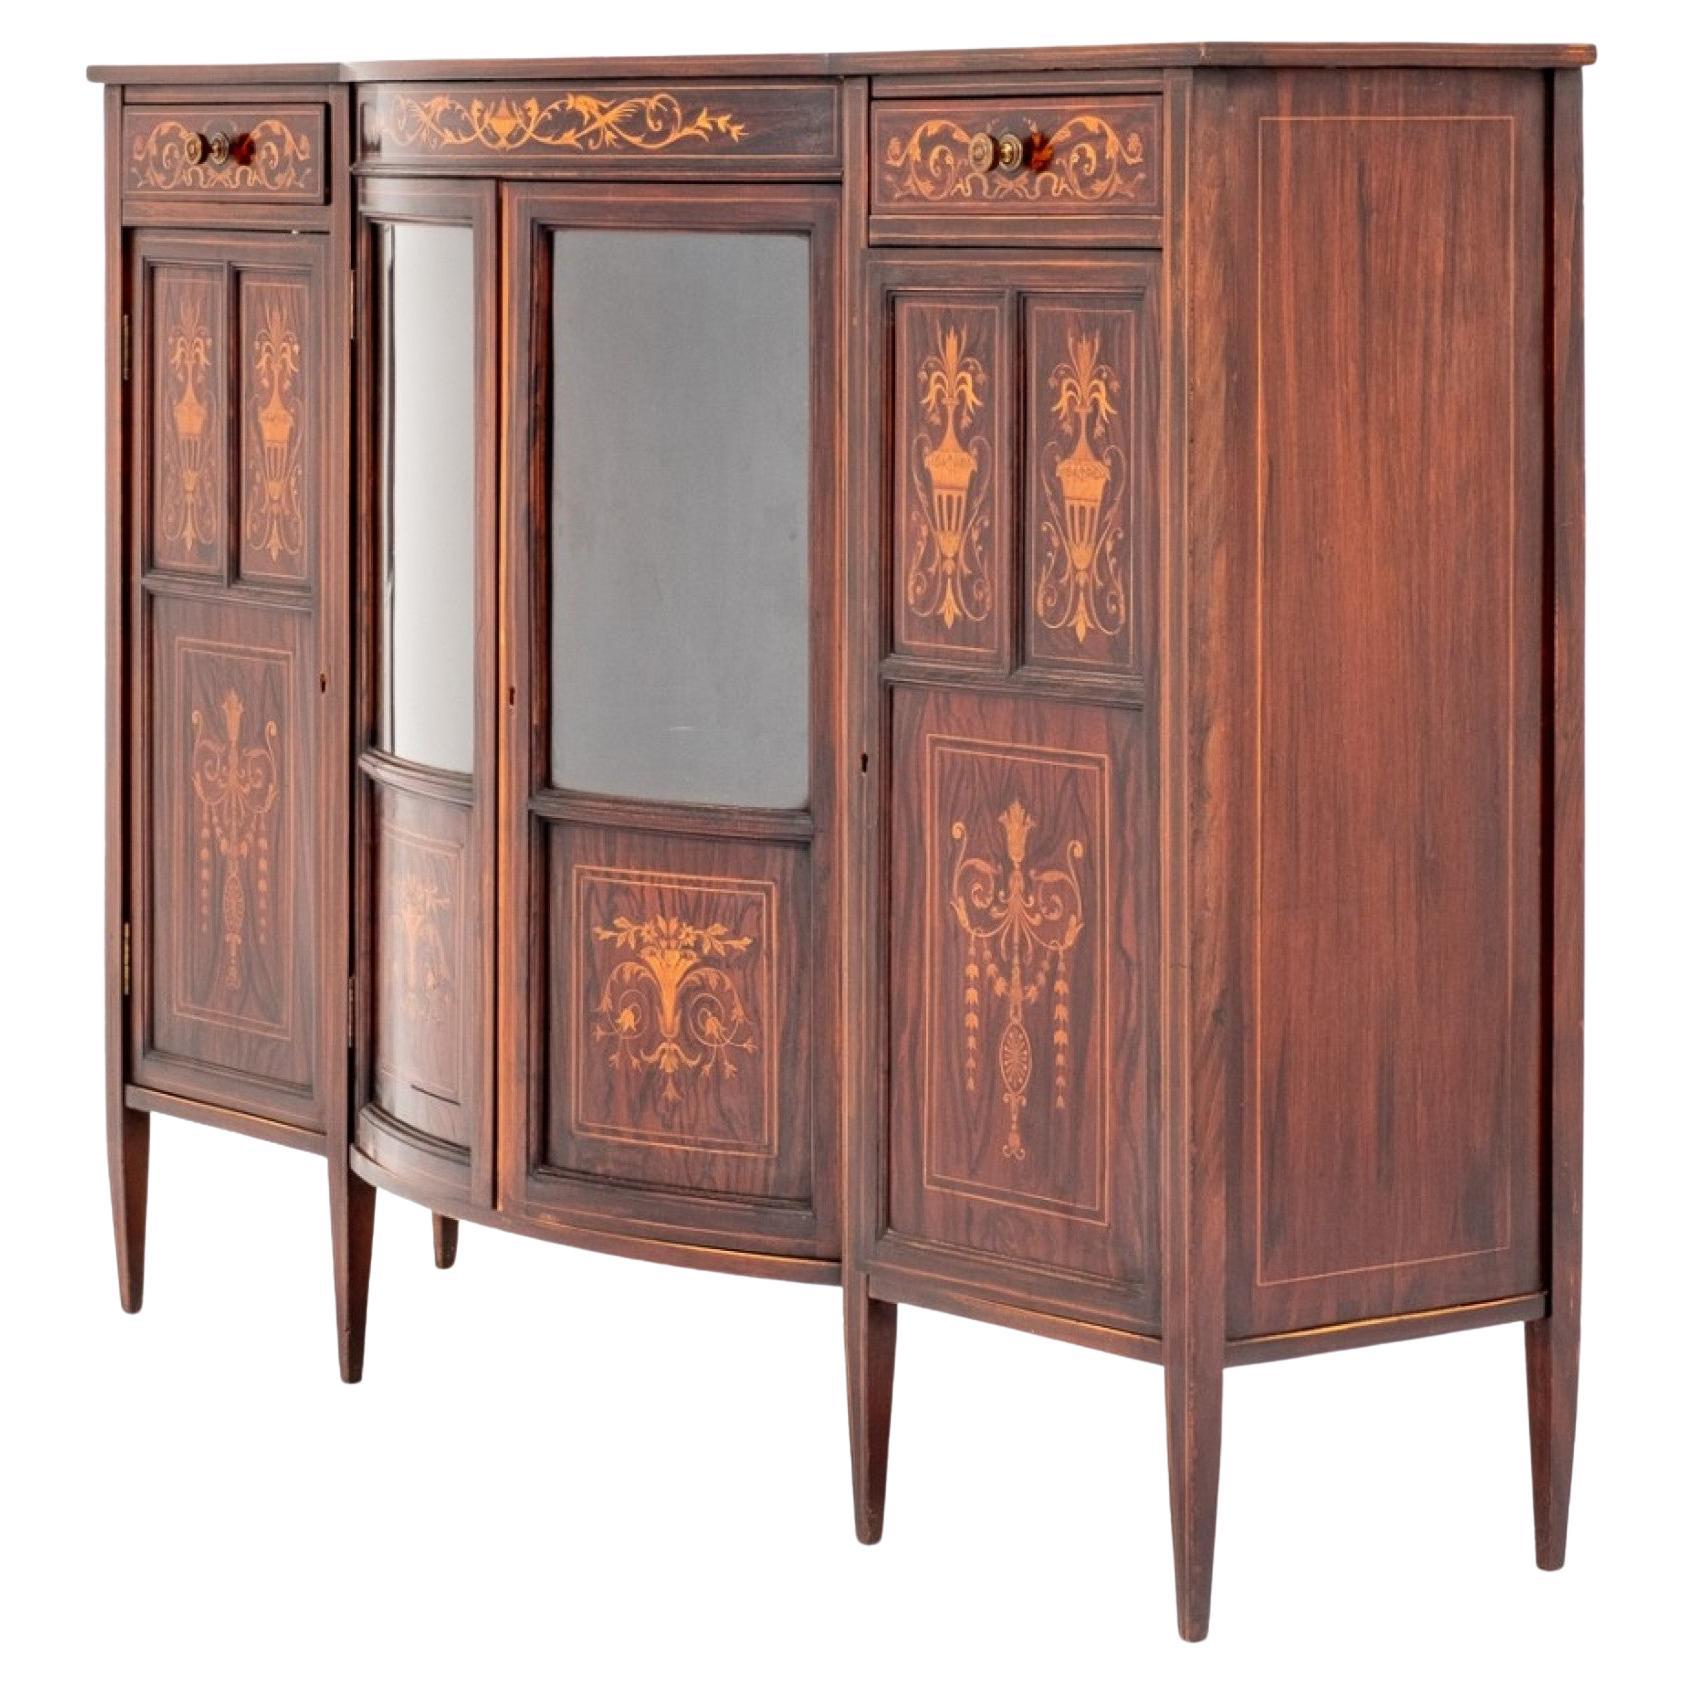 Sheraton Revival Cabinet Sideboard Edwards and Roberts 1880 For Sale